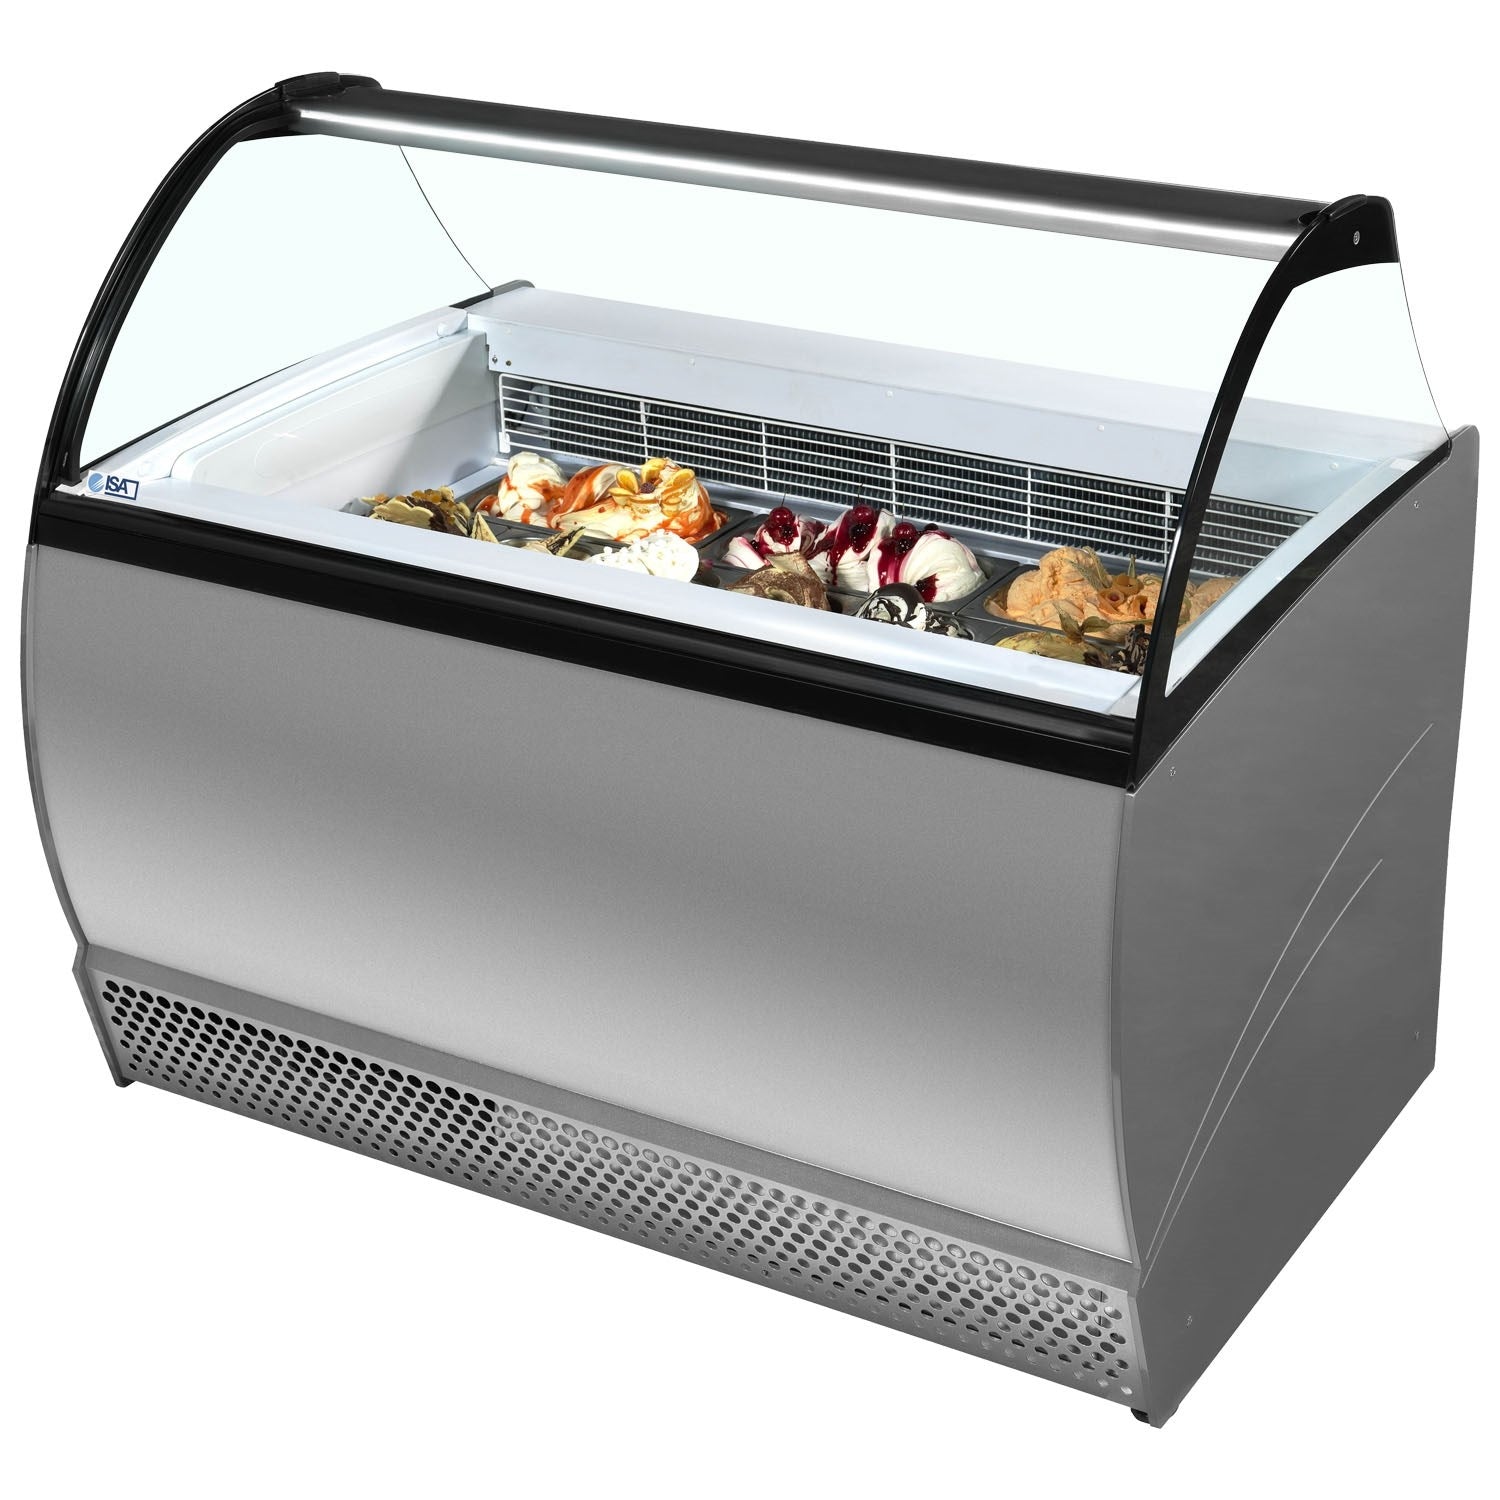 ISA ISABELLA 13LX Scoop Ice Cream Display Grey 1647mm wide.Product ref:00414.MODEL:ISABELLA 13LX Grey-🚚 3-5 Days Delivery